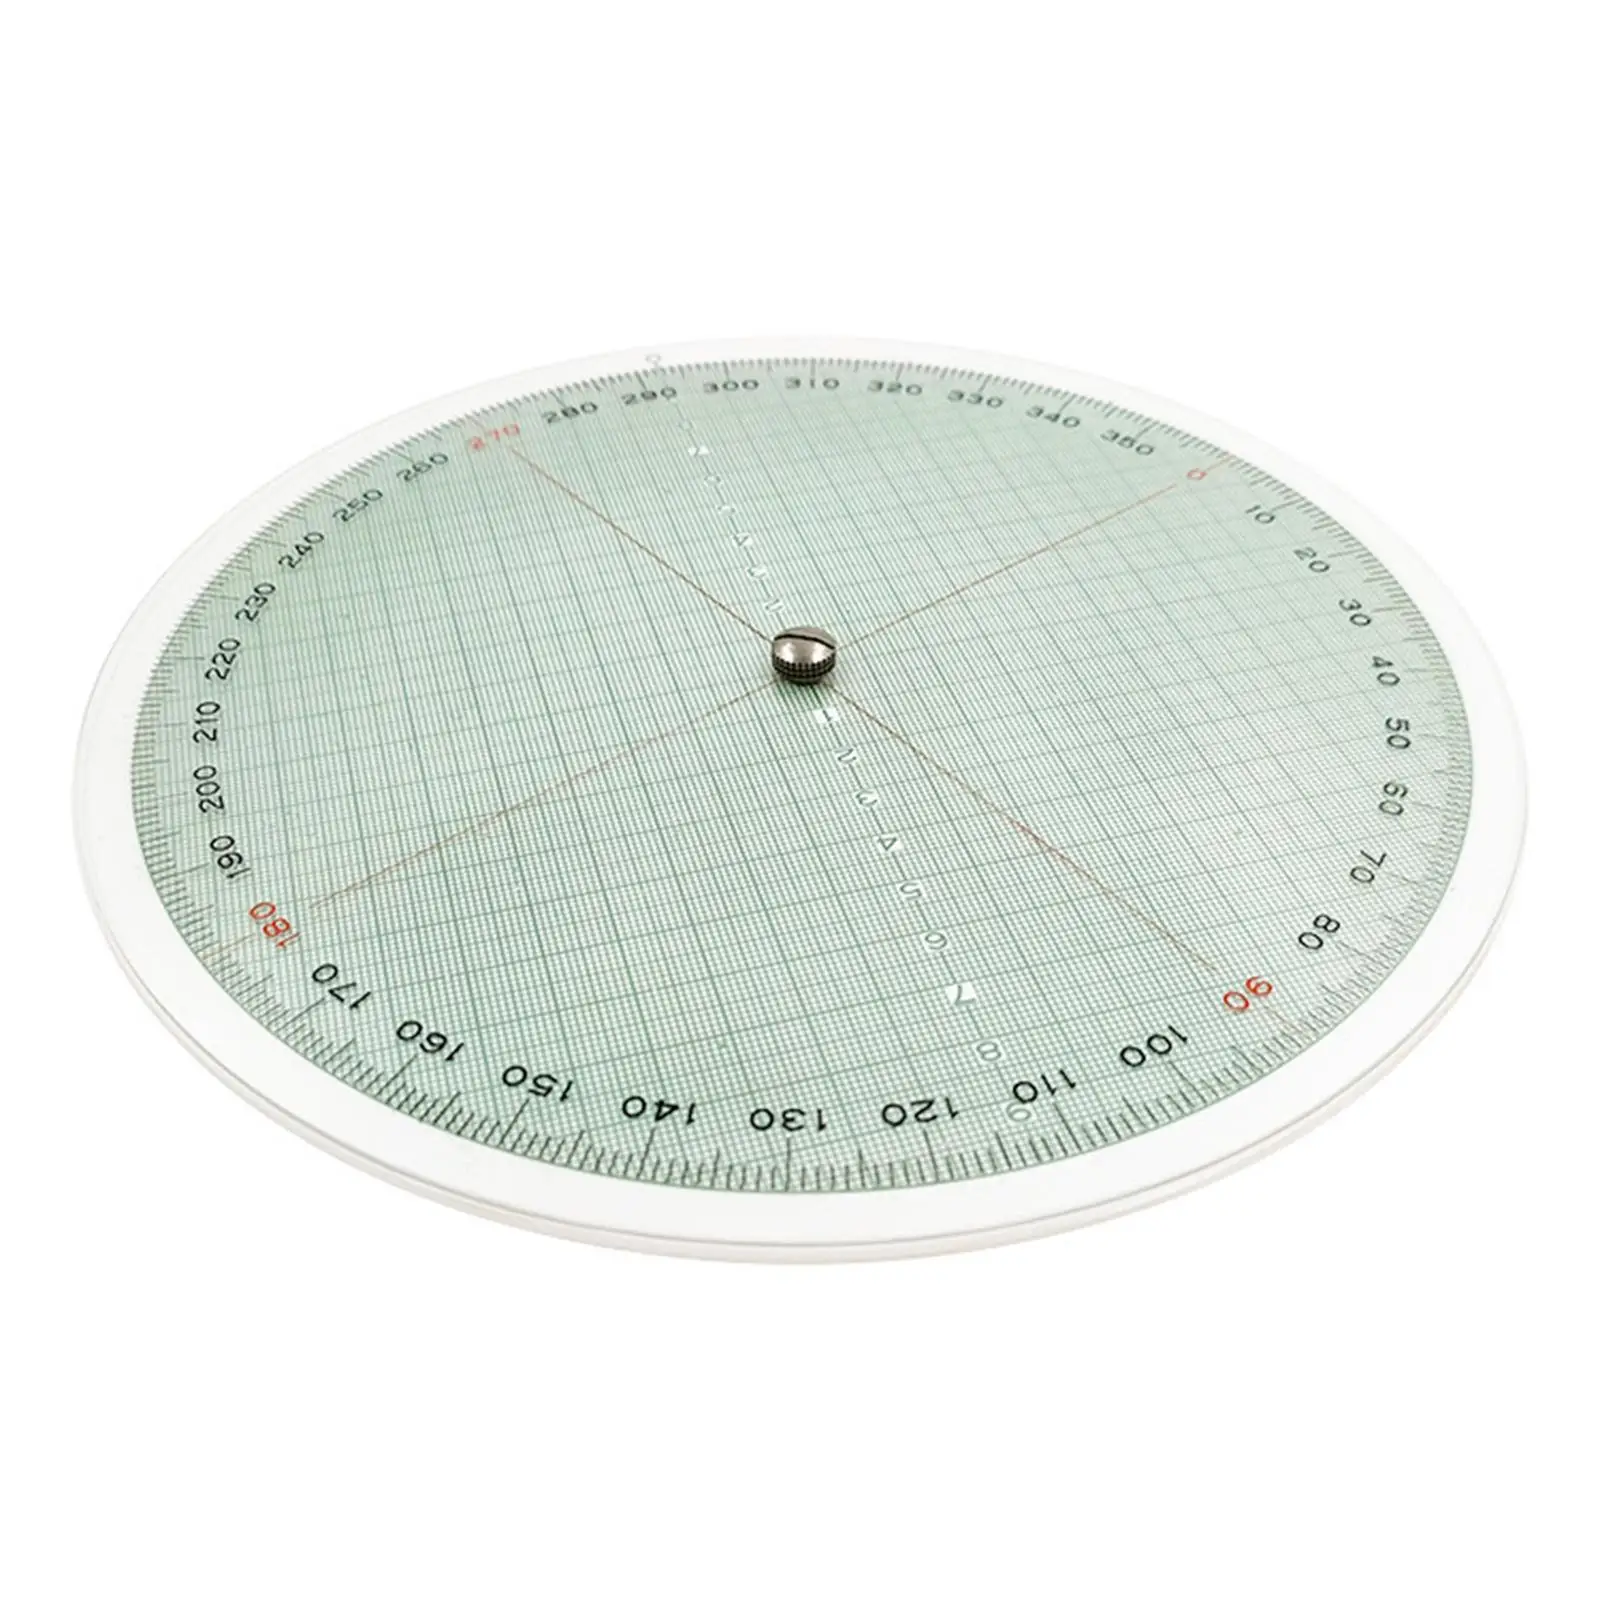 Nautical Slide Rule Plotting Professional Sturdy Lightweight Portable Durable Attachments Simple Using Sailing Circular Ruler